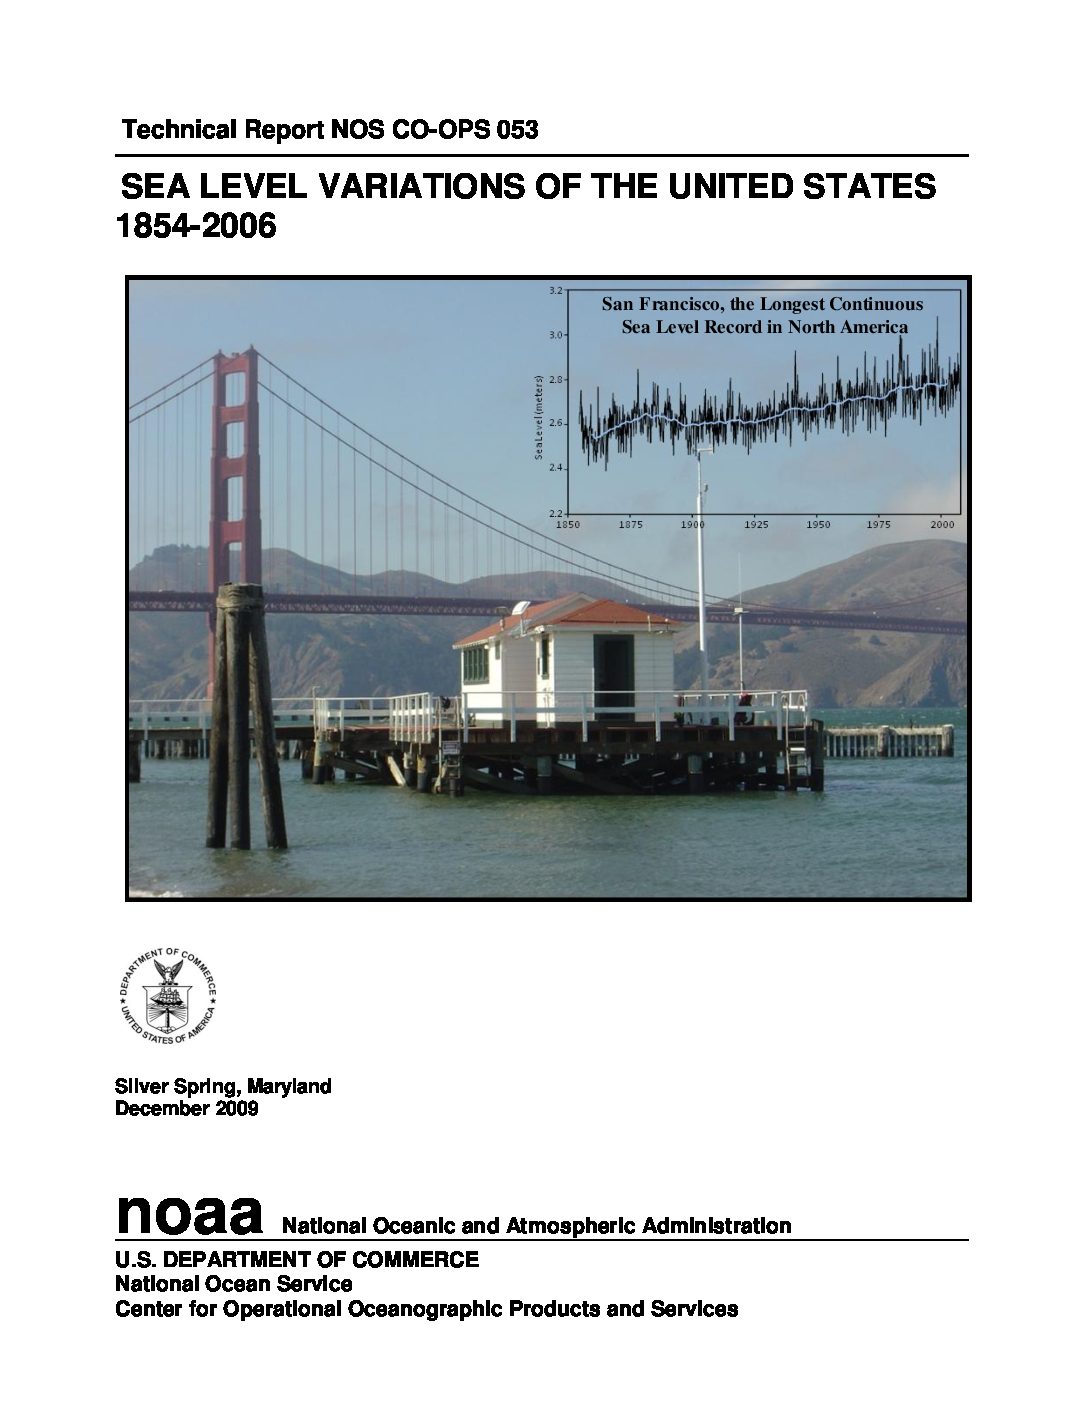 Sea Level Variations of the United States 1854–2006